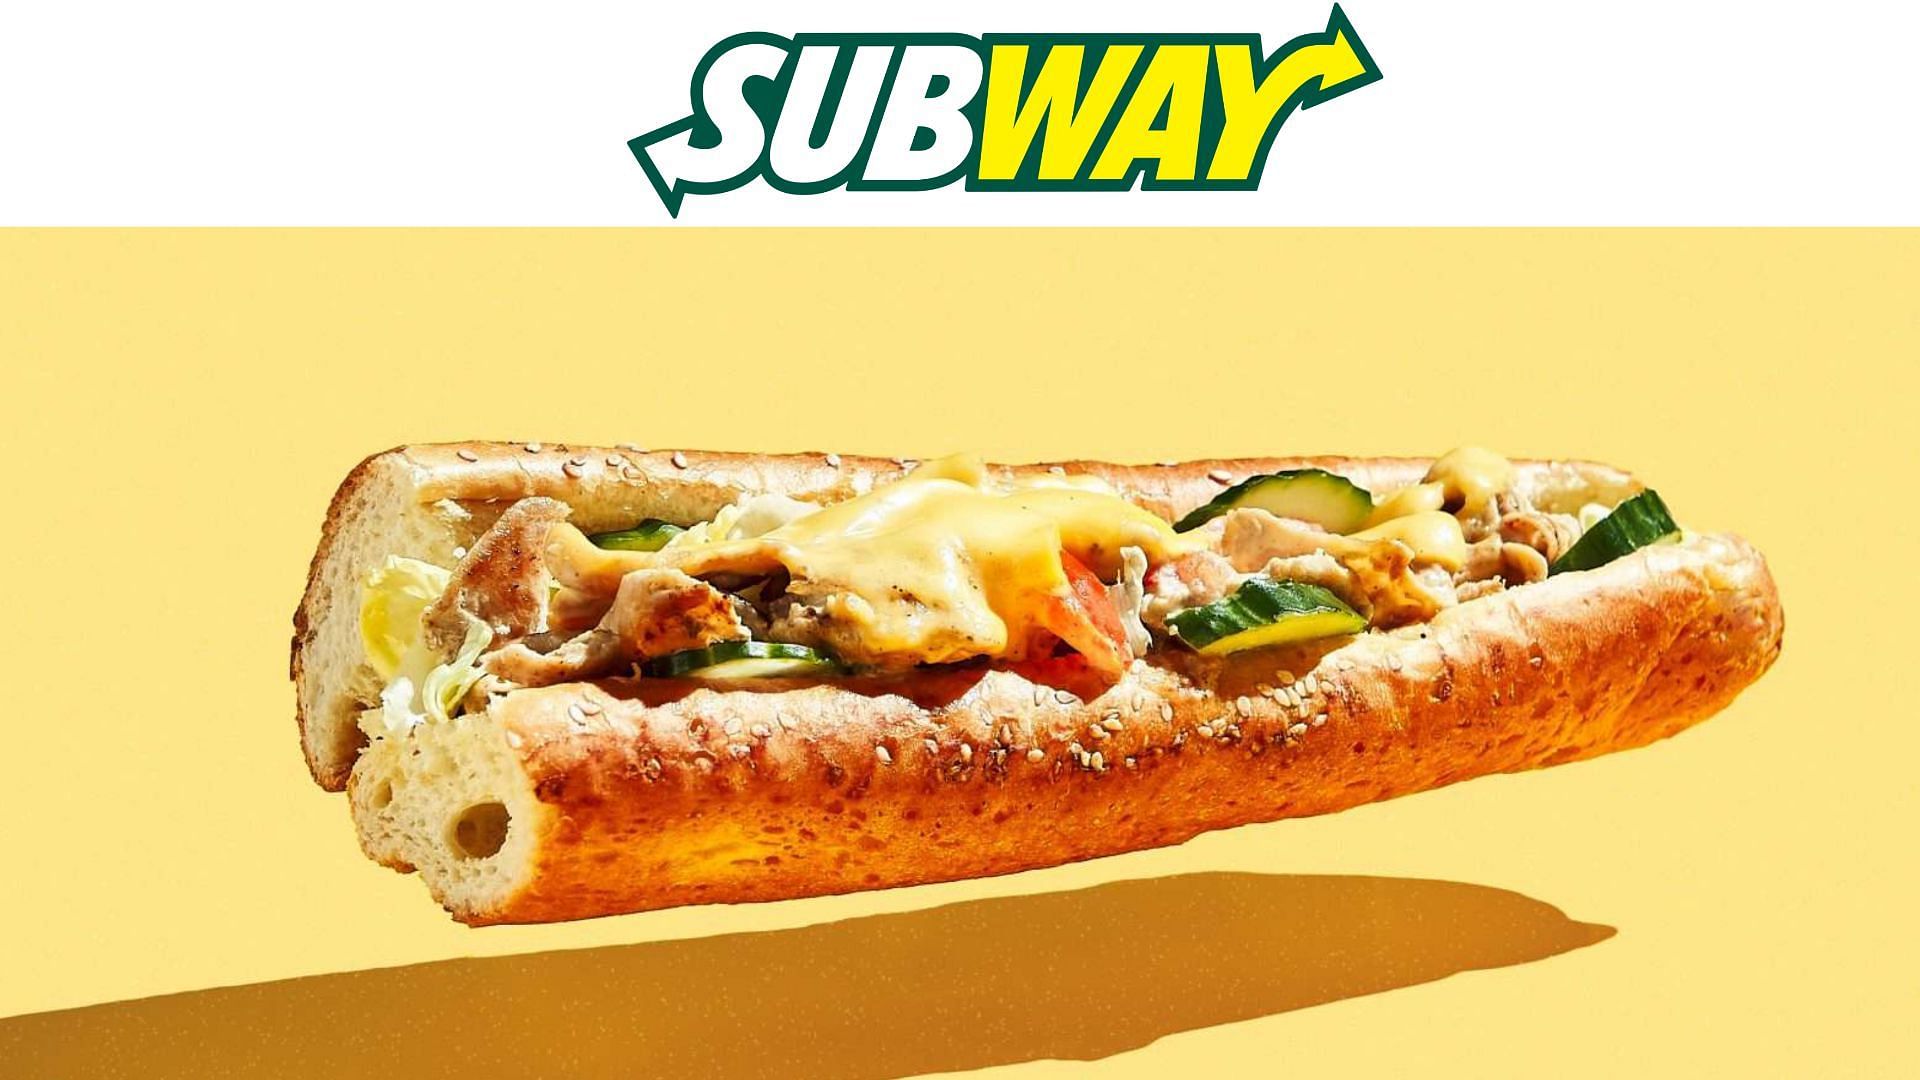 Subway introduces a limited time BOGO deal on Footlong sandwiches and other exciting offers on app orders (Image via Ryzhkov/iStock/Getty Images)